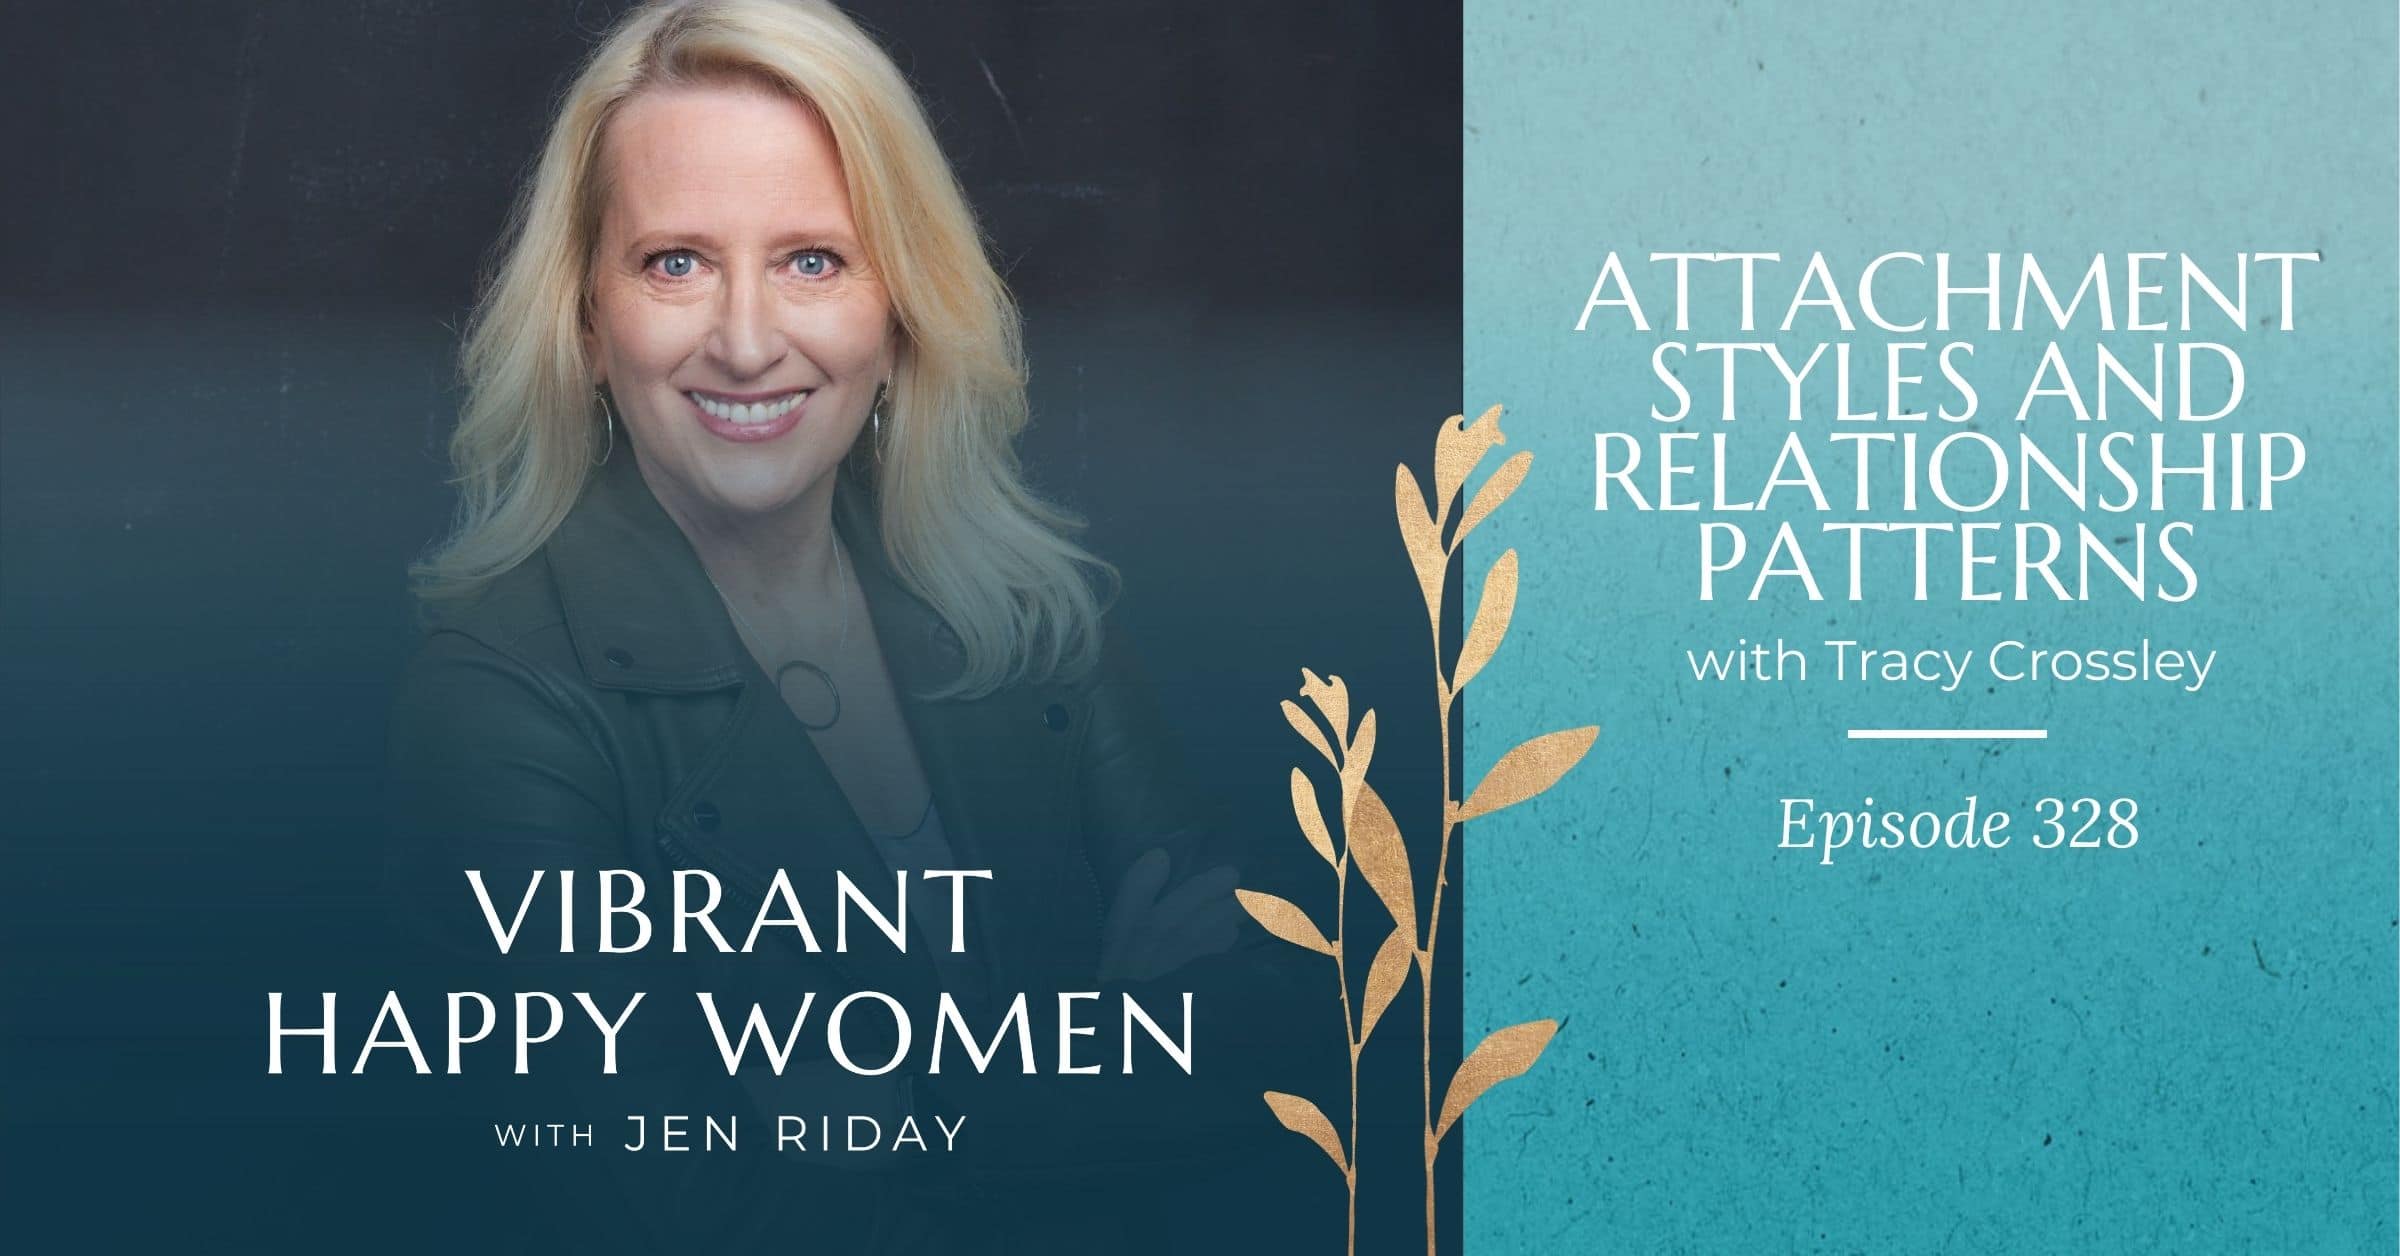 Vibrant Happy Women | Attachment Styles and Relationship Patterns (with Tracy Crossley)